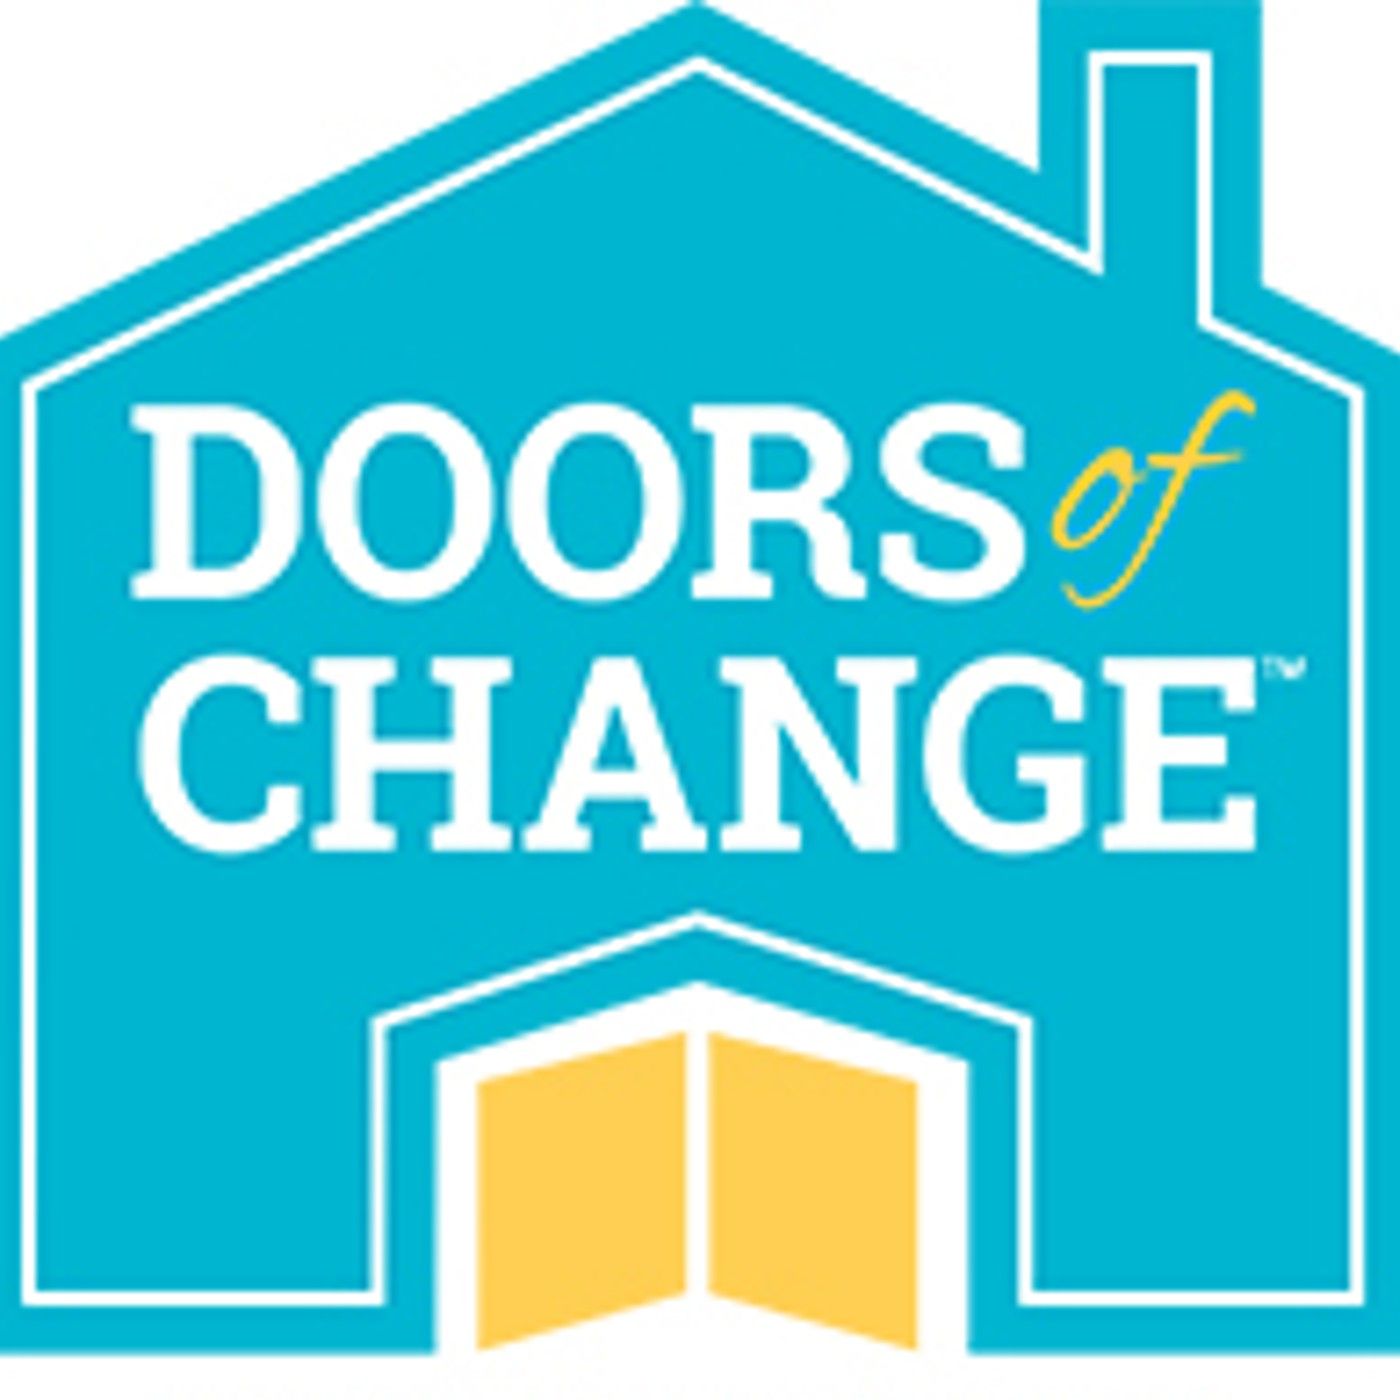 S1 E43 Guests - Jeffery Sitcov and Joanne Newgard of Doors of Change